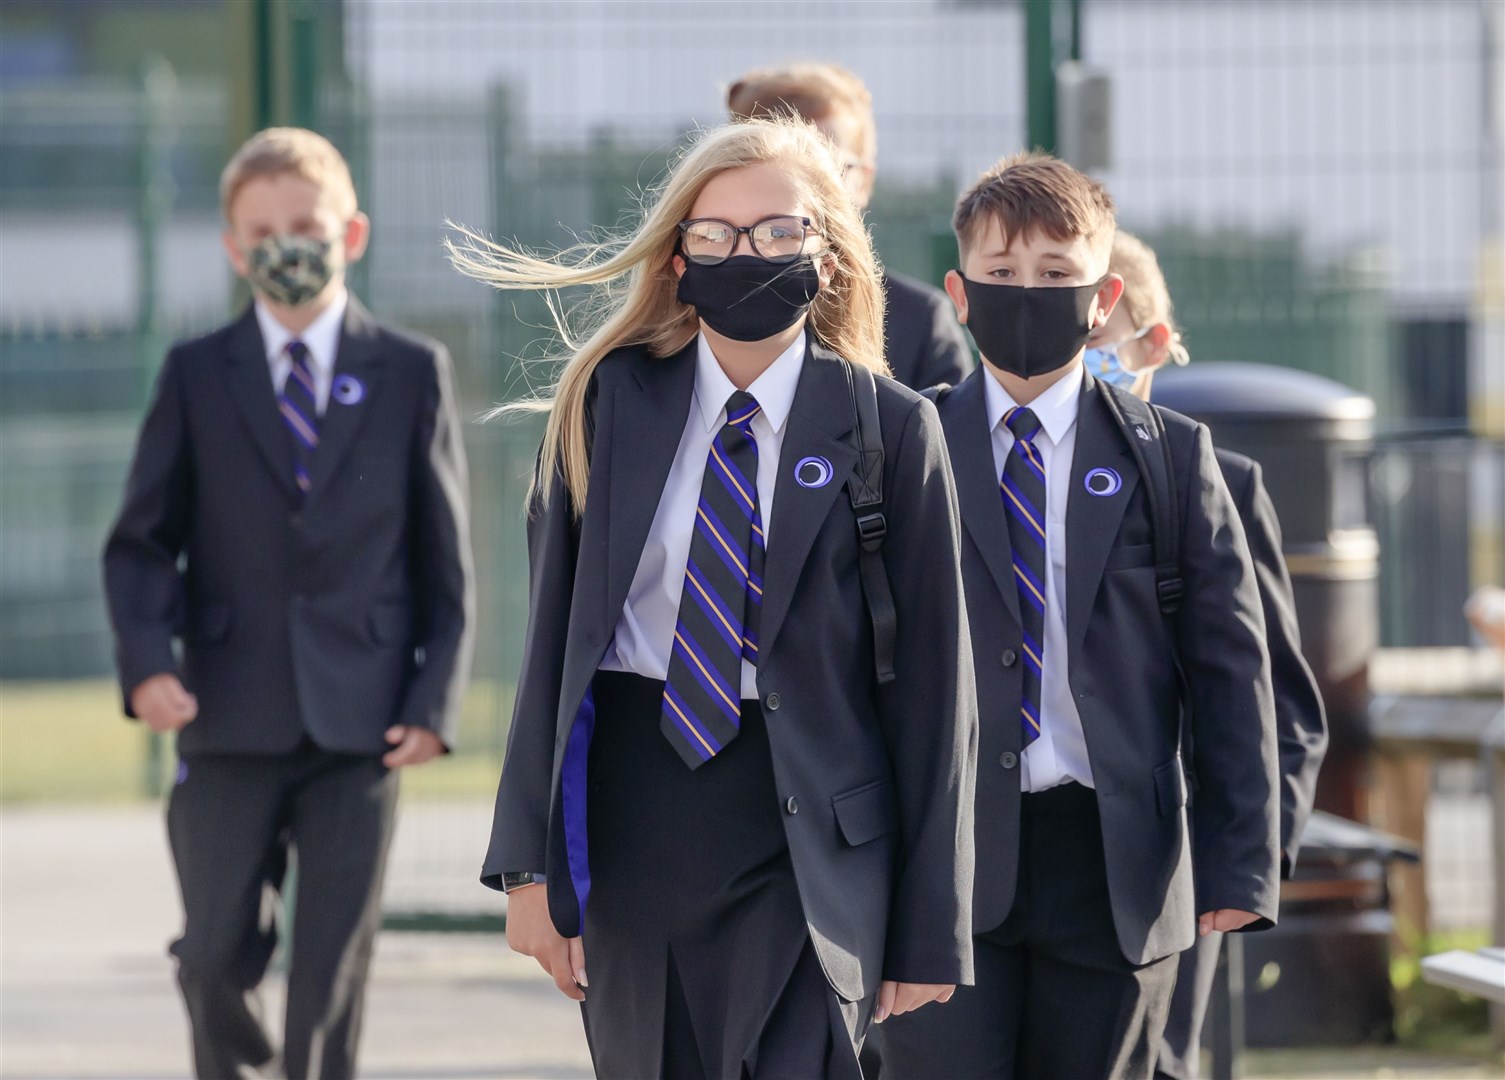 The Education Select Committee was sitting as schools in England reopened to pupils following the coronavirus lockdown (Danny Lawson/PA)